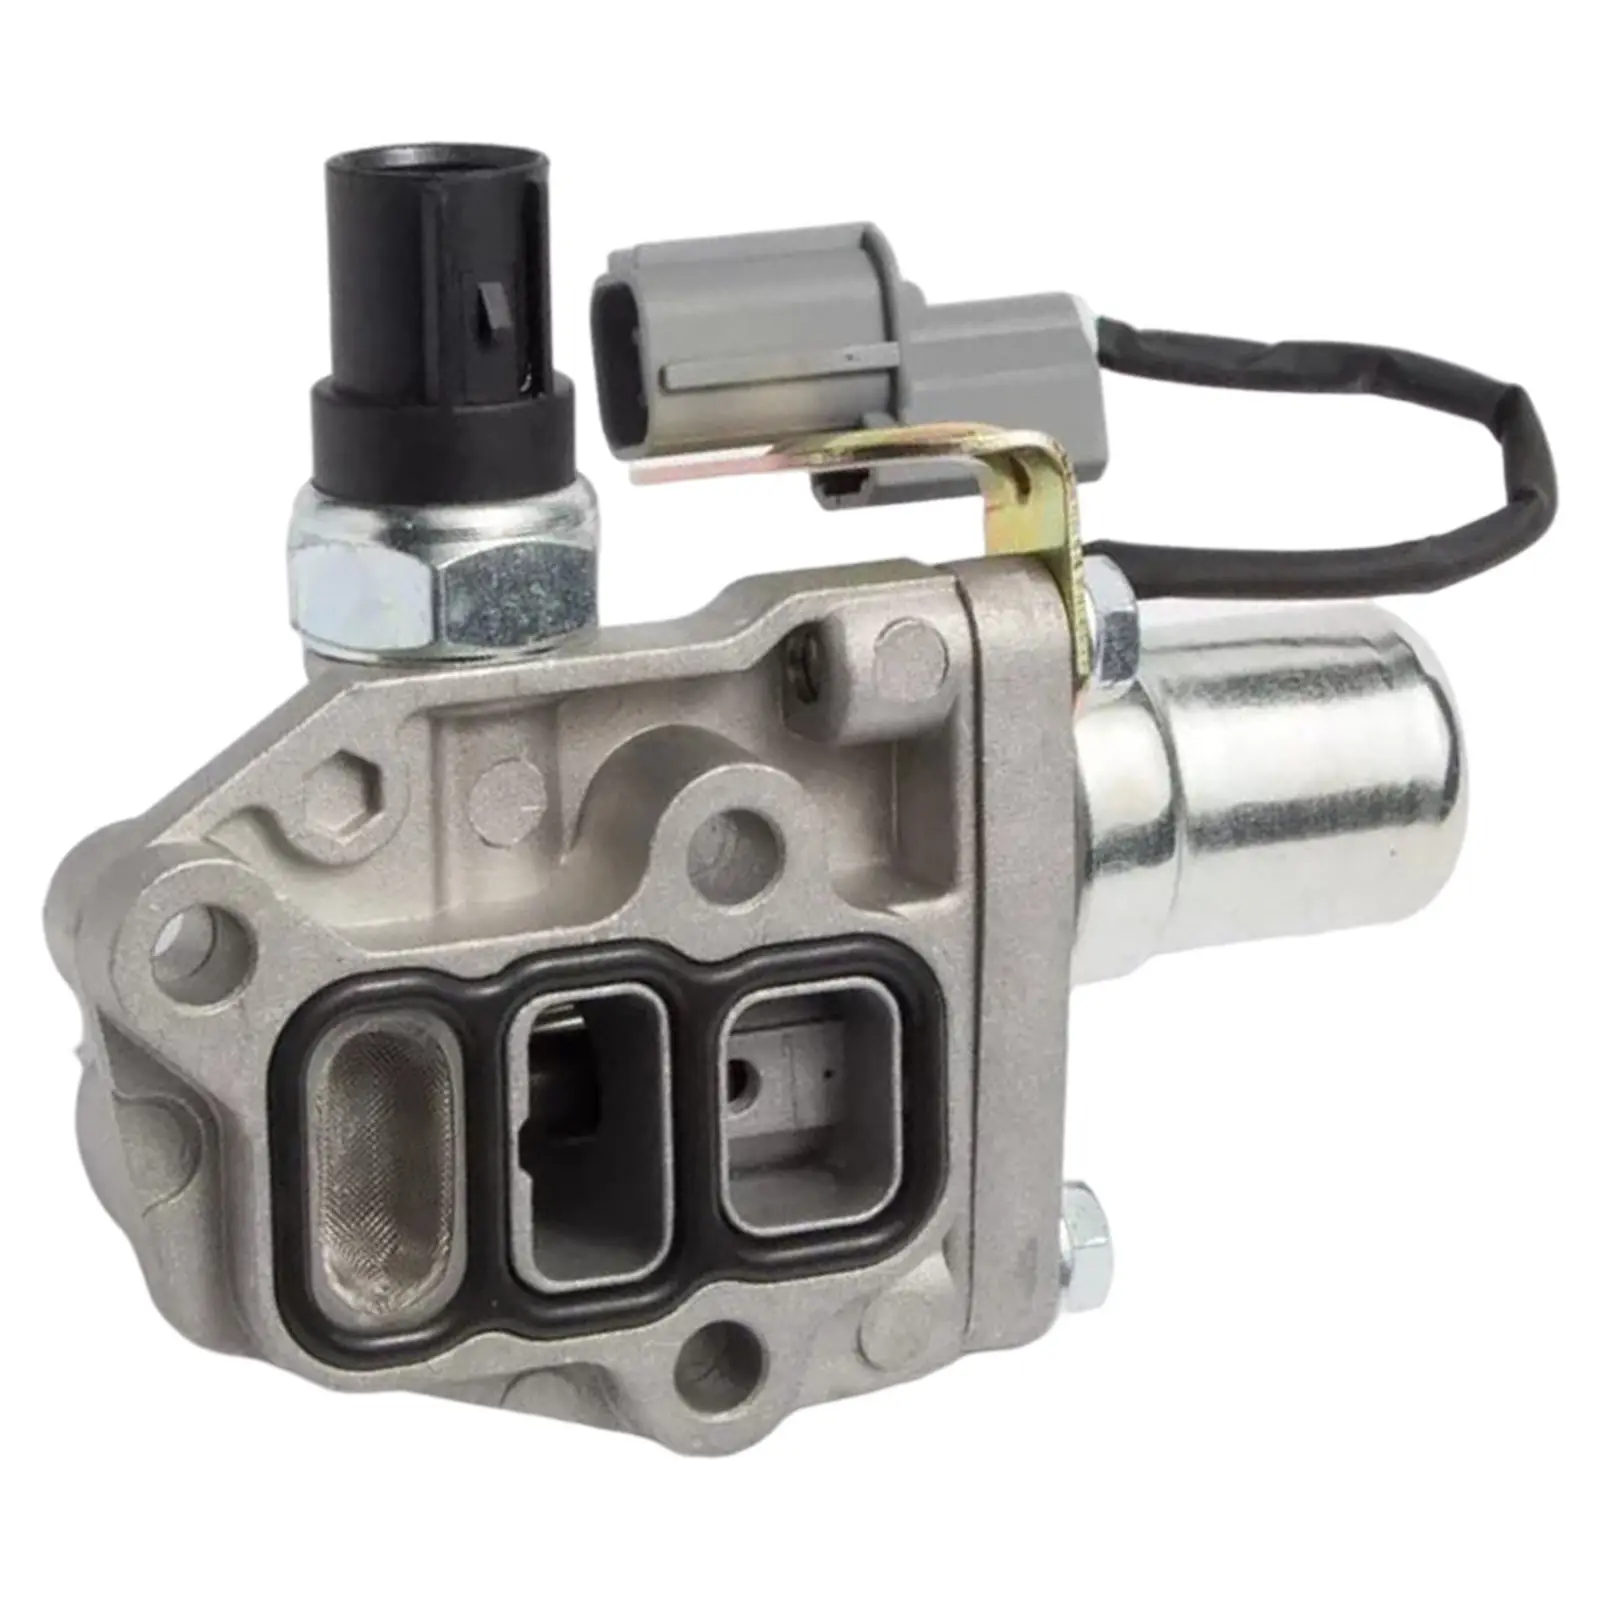 15810-PAA-A01 Solenoid Spool Valve Solenoid Valve Assembly for Acura CL 1998-1999 Fit for Honda Car Parts Replacement